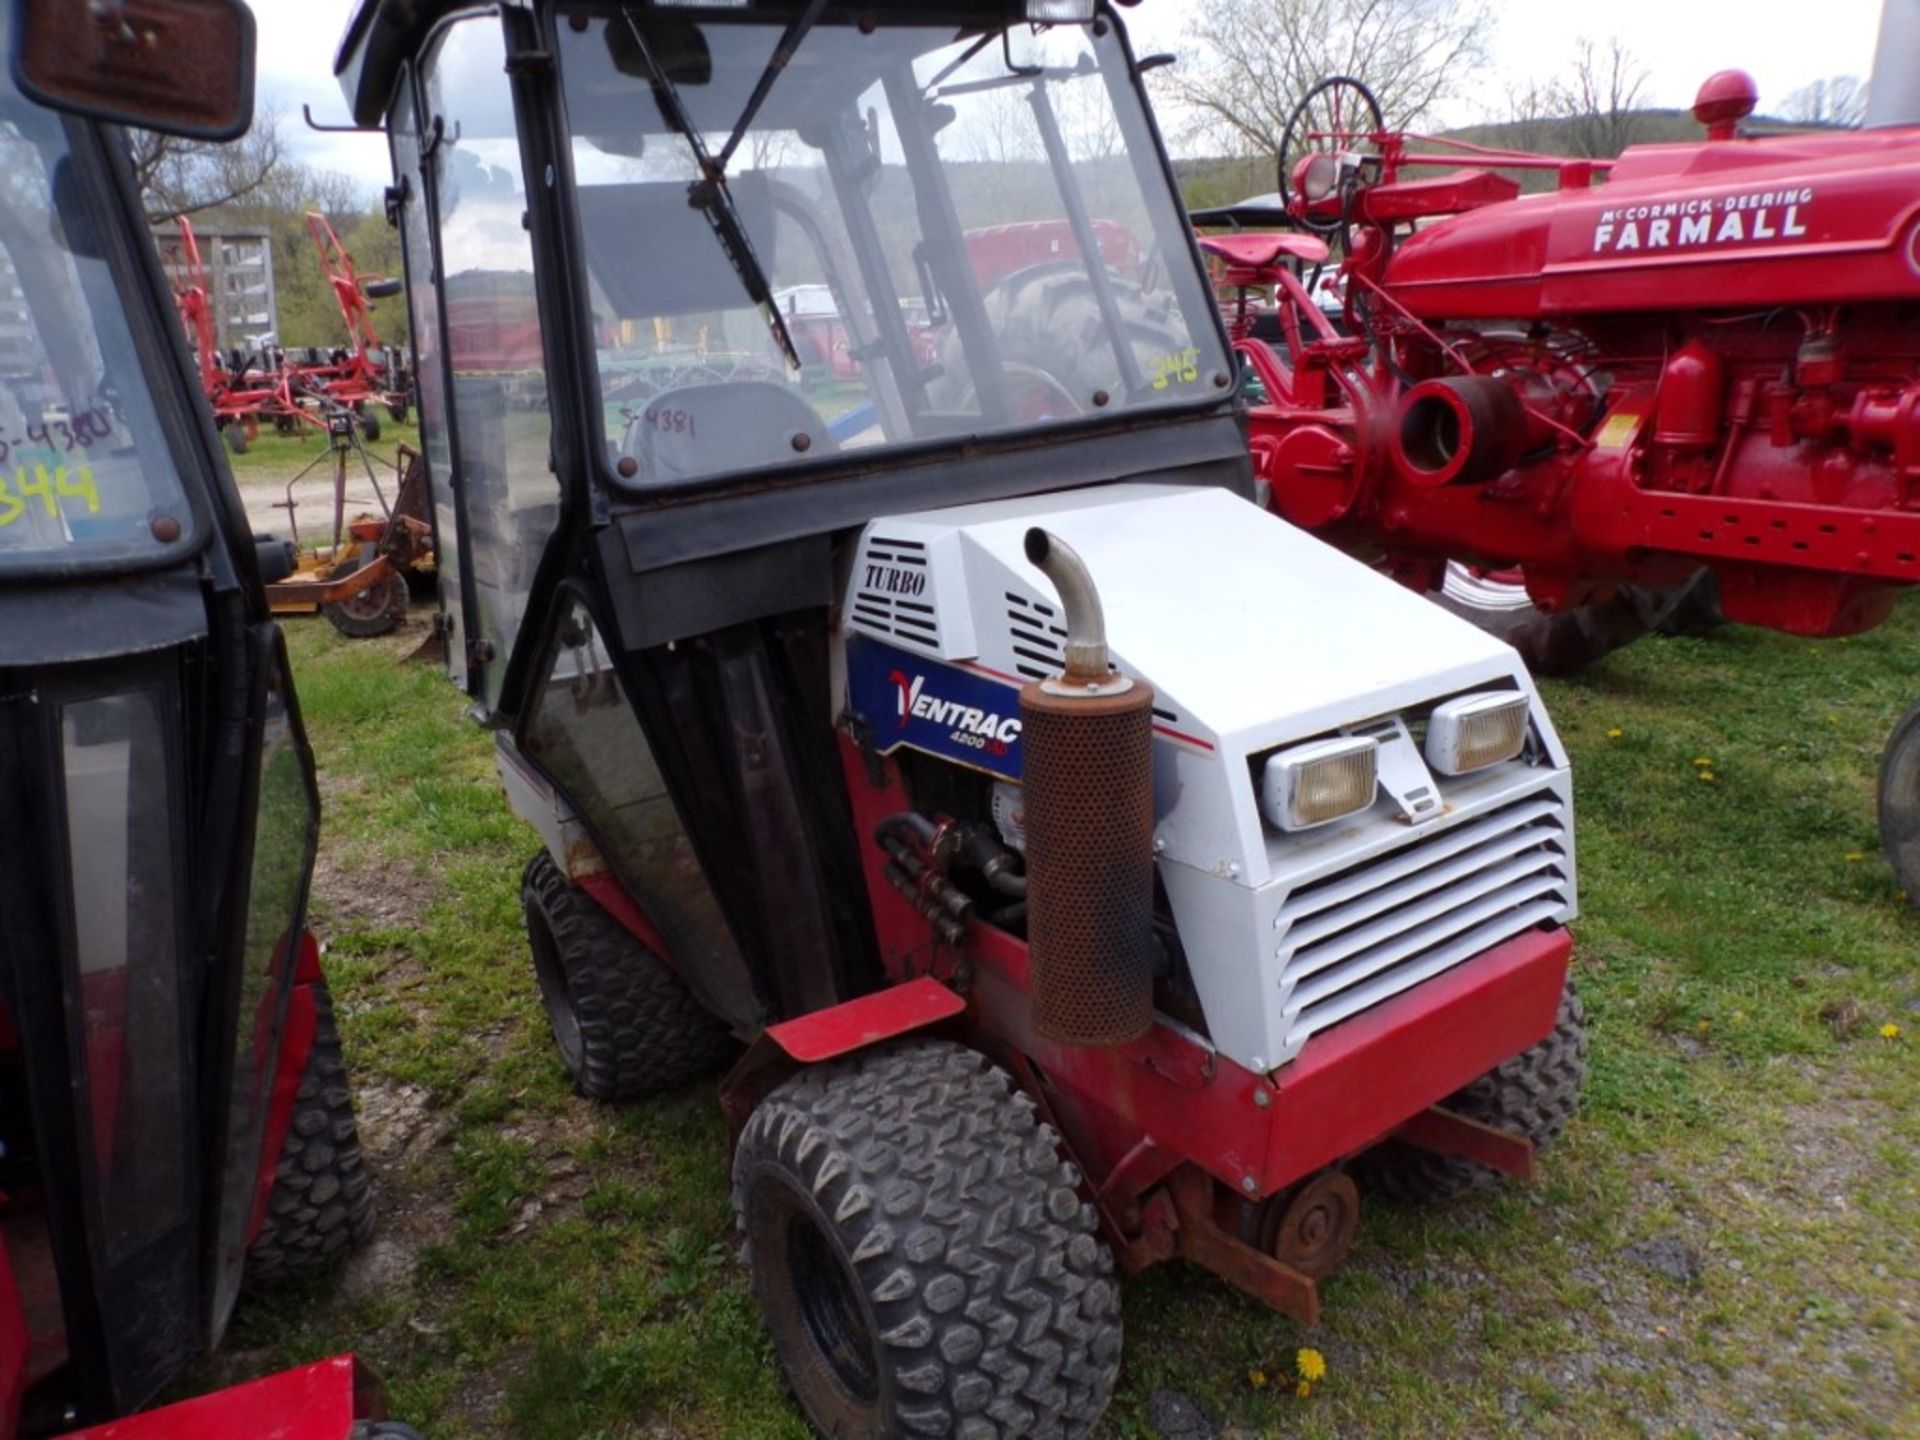 Ventrac 4200VXD 4wd Tractor, Cab, Dsl. Eng., 2500 Hrs., Rear Hyds. (4381) - Image 2 of 4